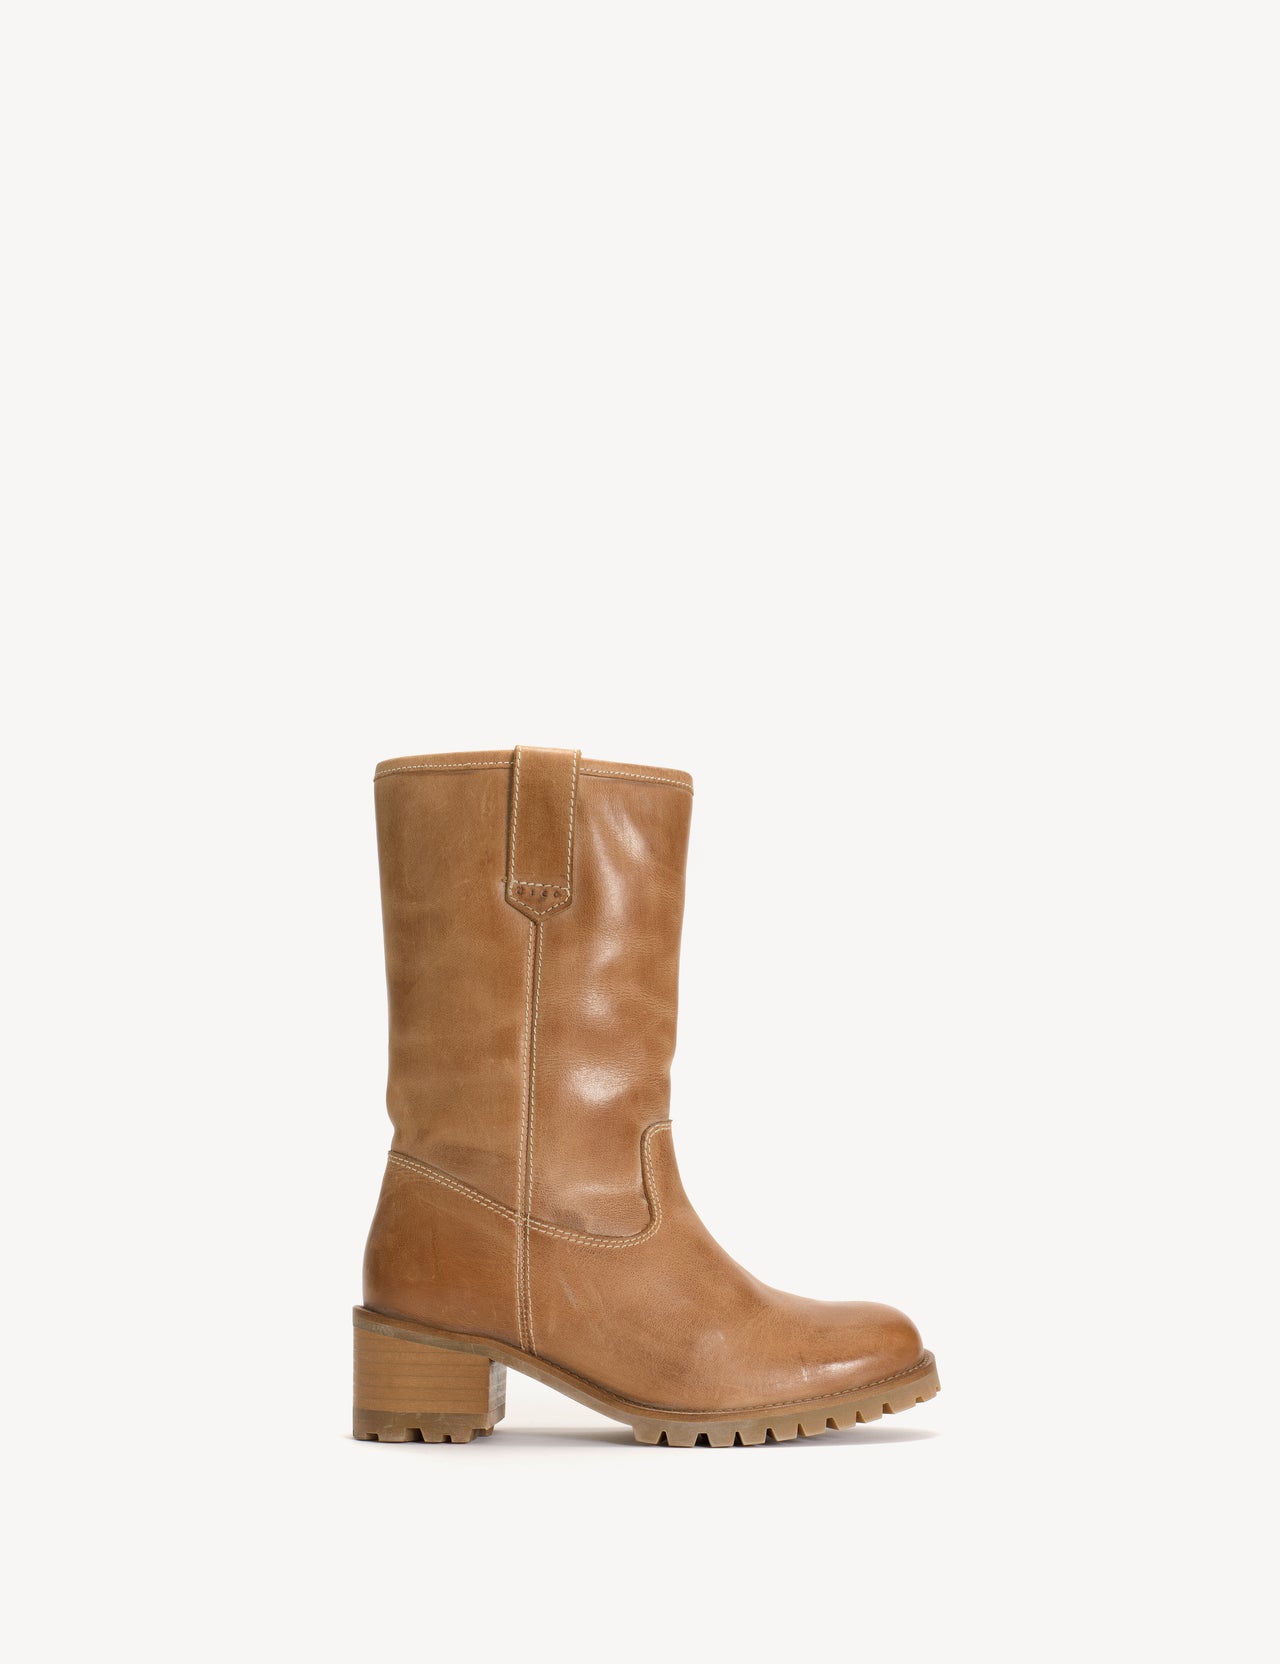 Kimmi Boot In Dark Tan Escovado Leather with 50mm heel